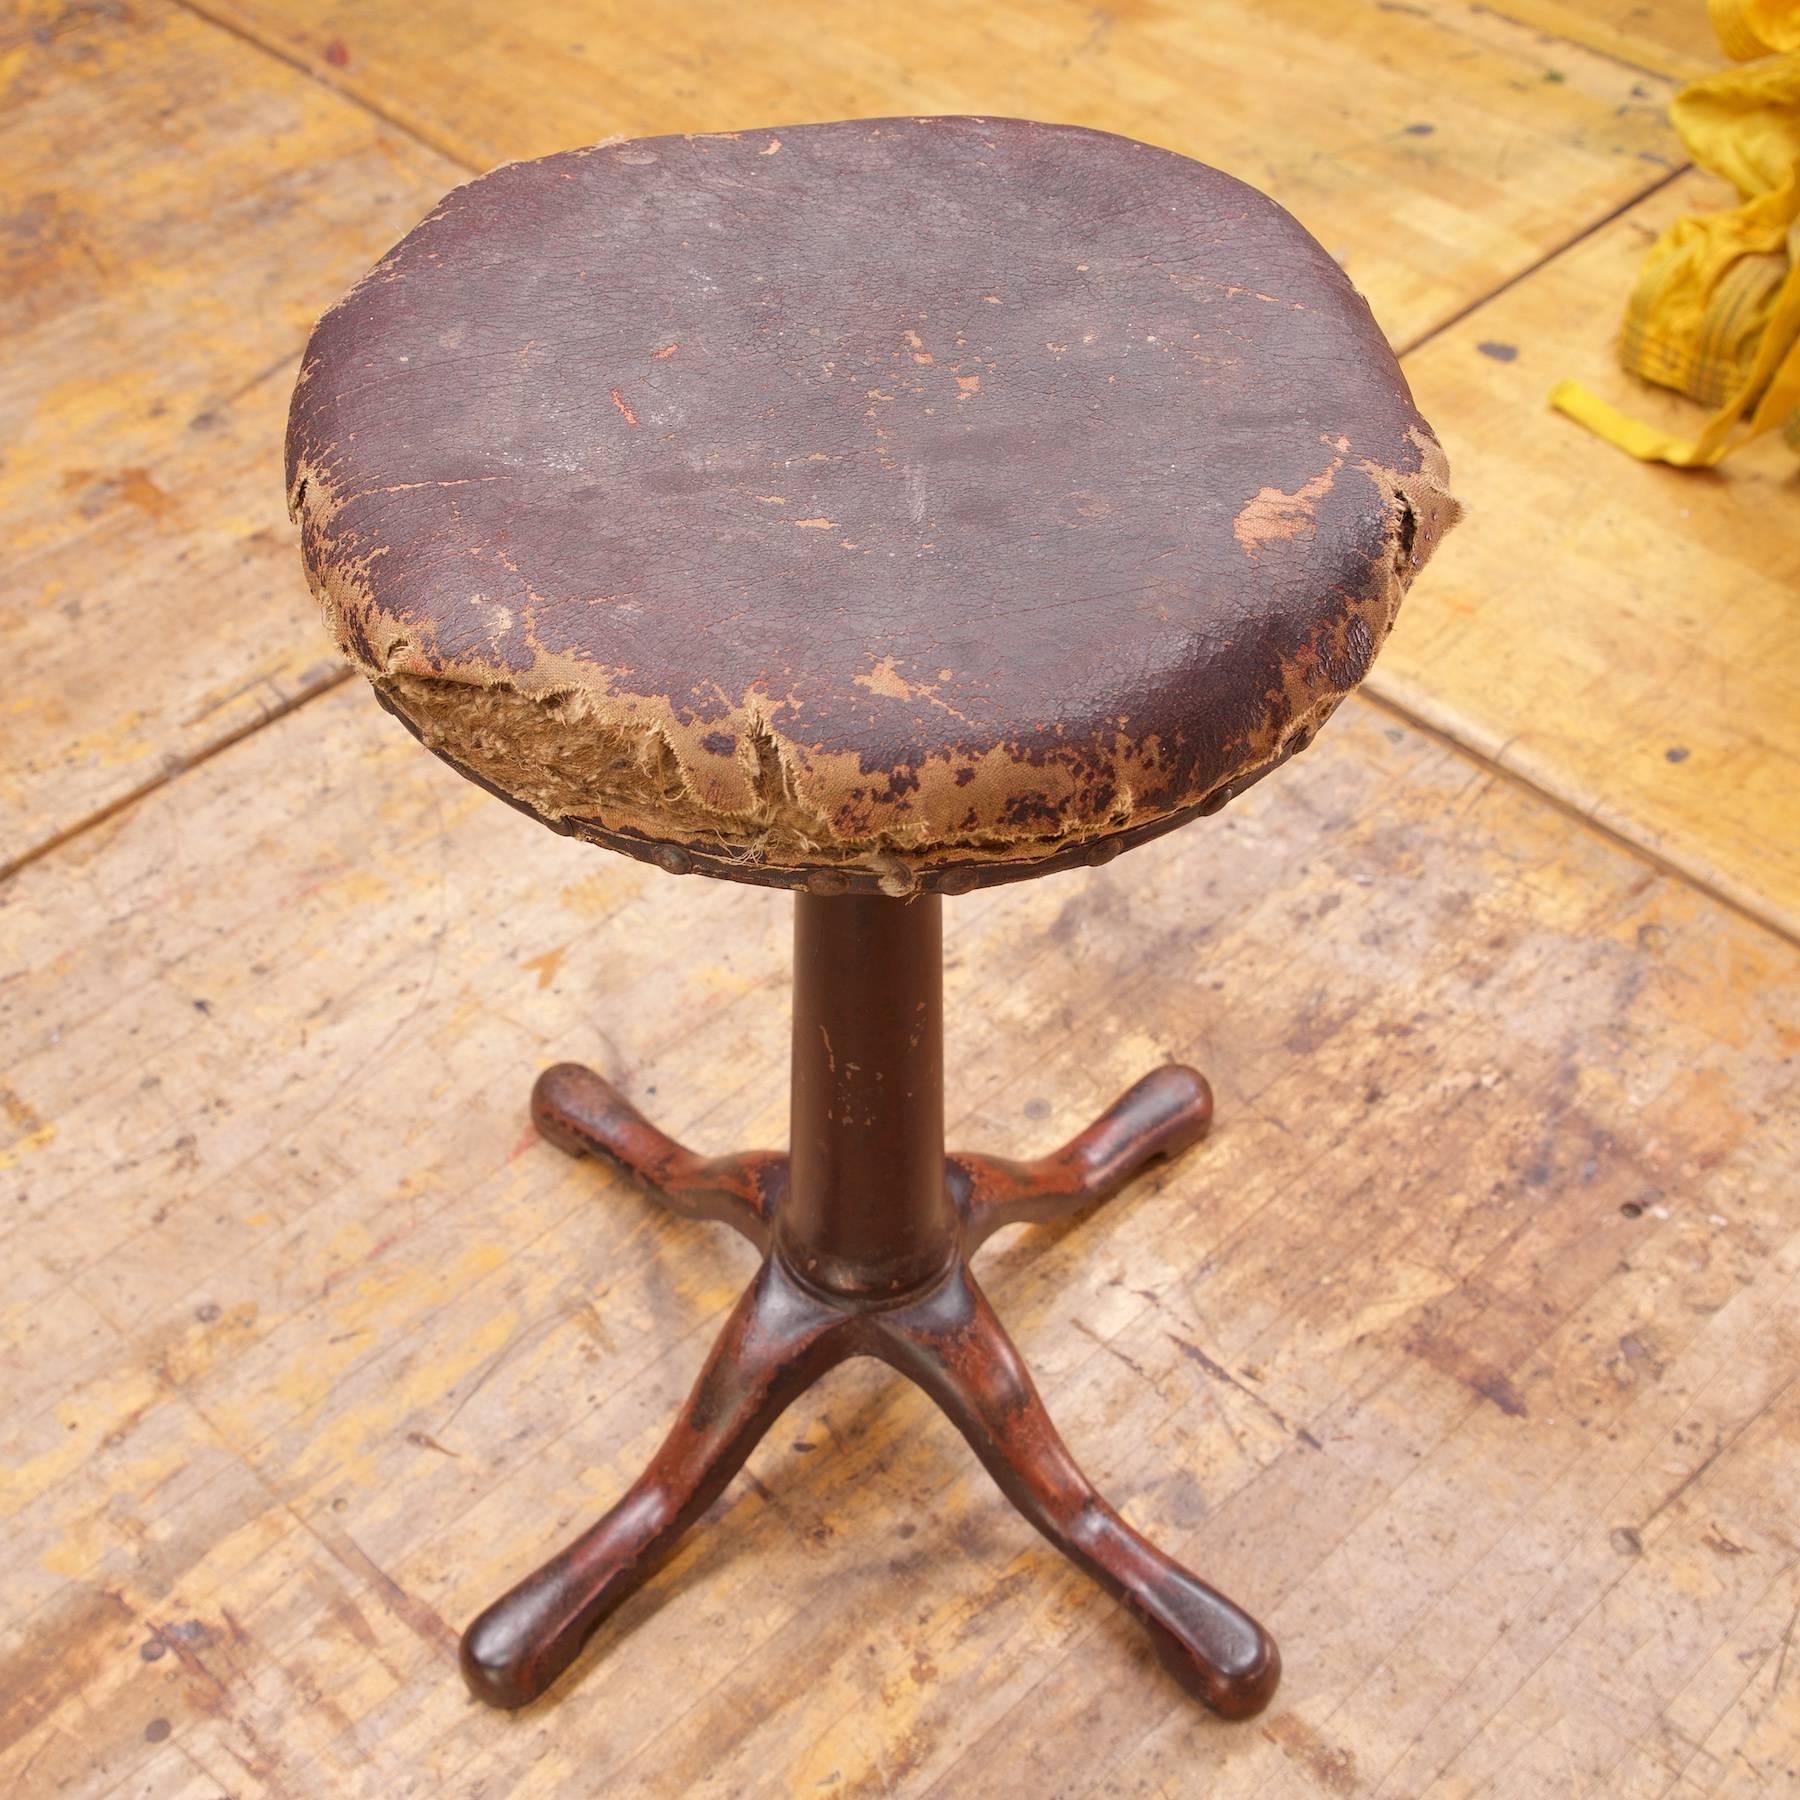 Ready for you to re-upholster to match your interior. Vintage industrial Cooper & Sons cast iron swivel piano stool. Fully functional. Tattered upholstery.